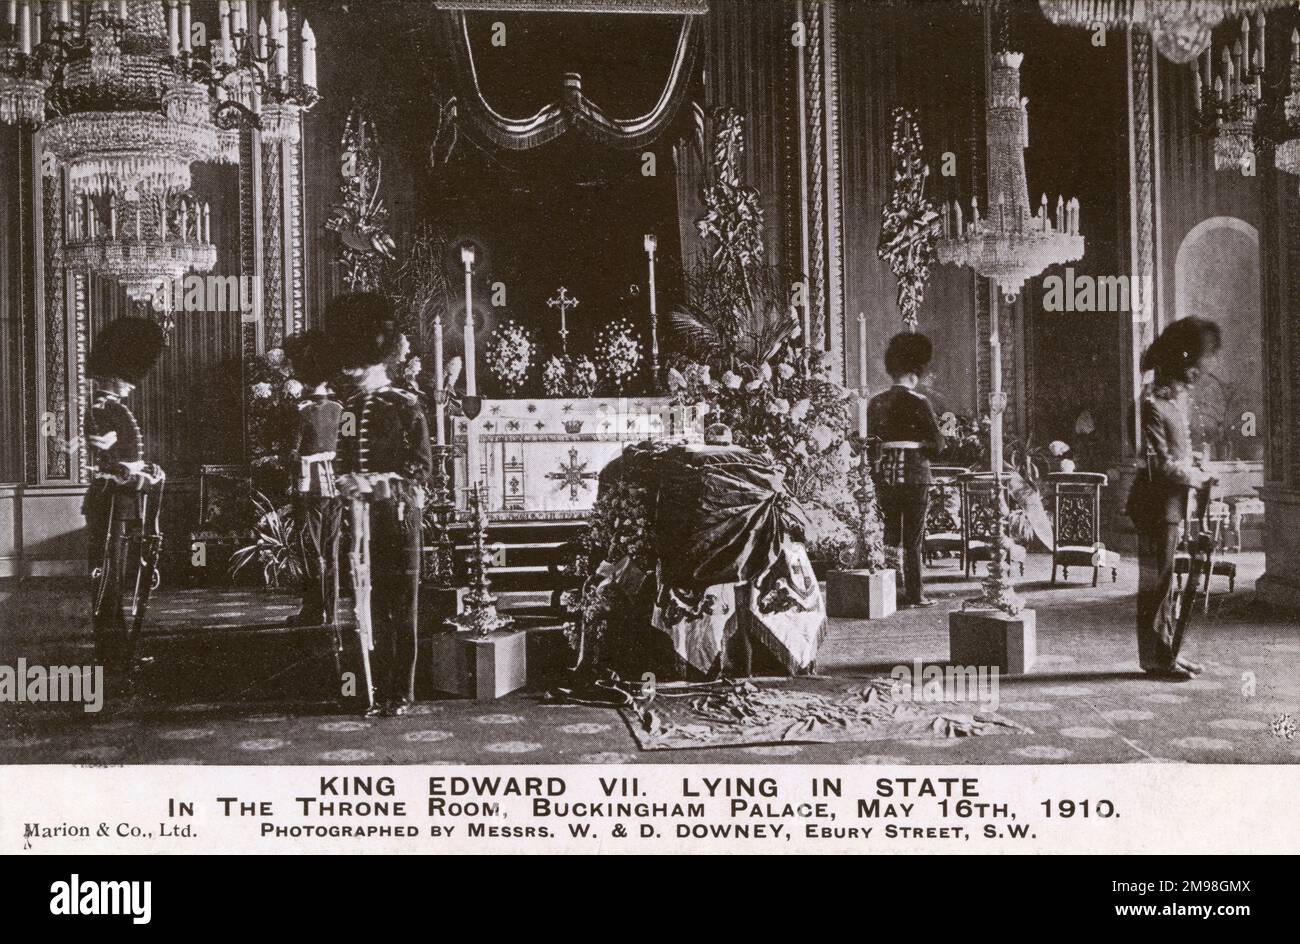 King Edward VII lying in state in the Throne Room of Buckingham Palace, London, 16 May 1910. Stock Photo